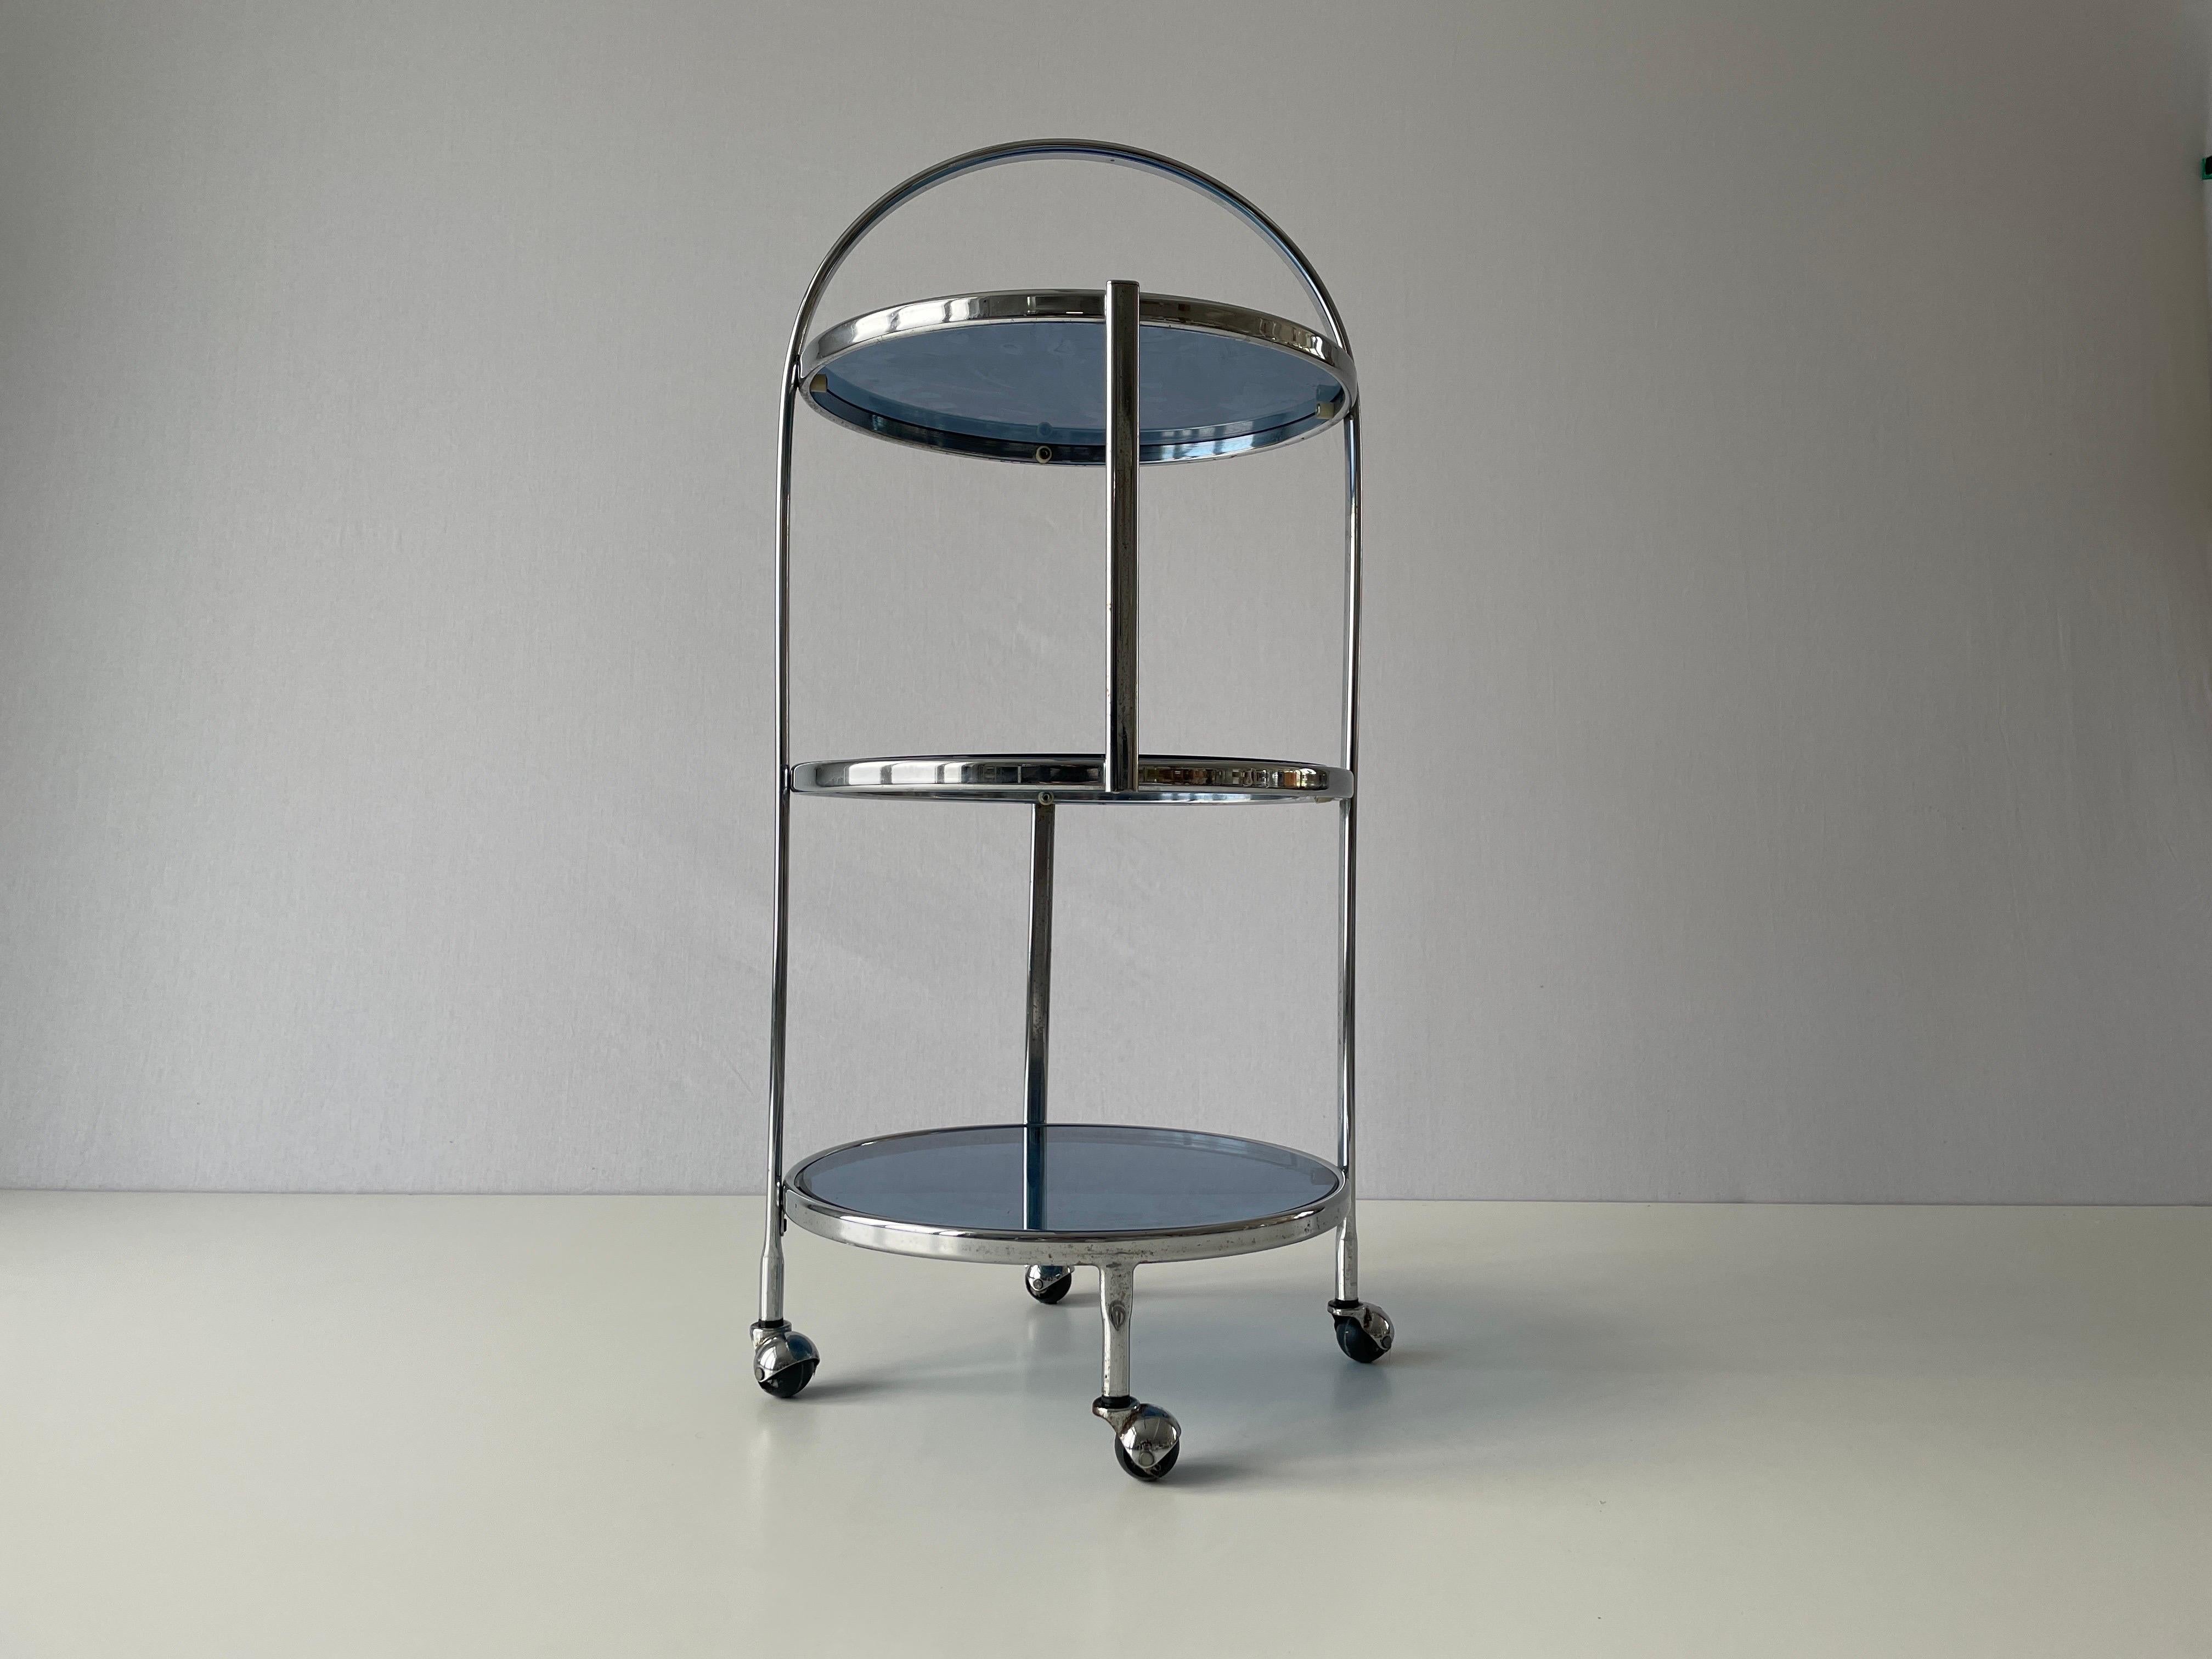 Italian Design 3-layer Chrome and Blue Glass Trolley, 1960s, Italy

Measurtements :

Height: 86 cm
Diameter: 39 cm
Shelf heights from bottom to top: 15cm , 42 cm and 70 cm

Please do not hesitate to ask us if you have any questions.